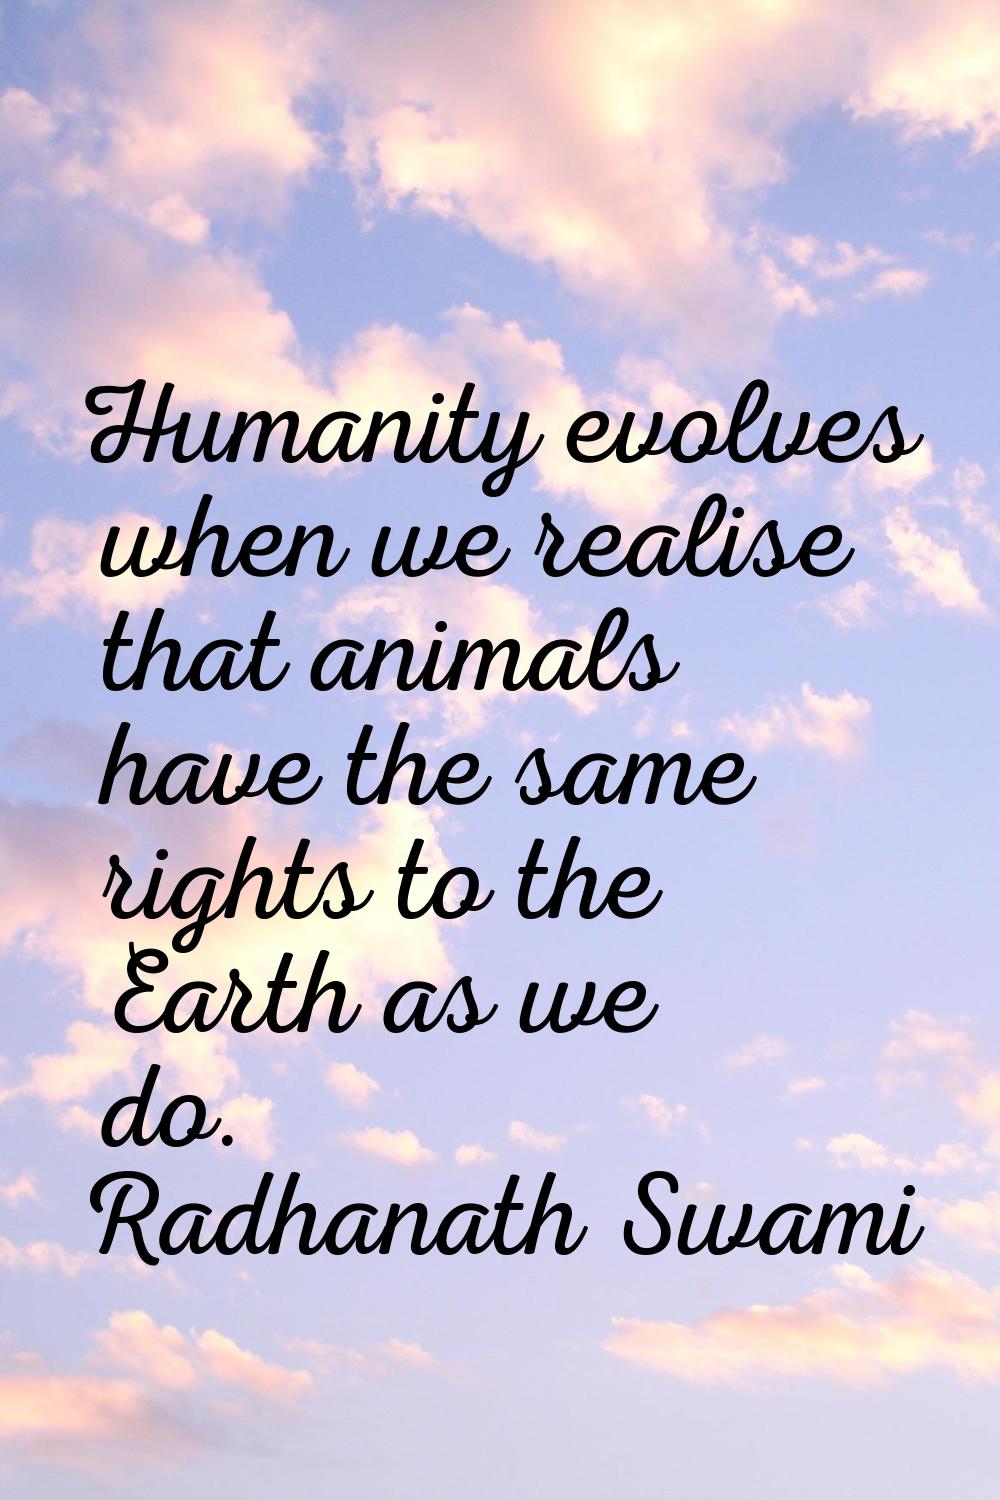 Humanity evolves when we realise that animals have the same rights to the Earth as we do.